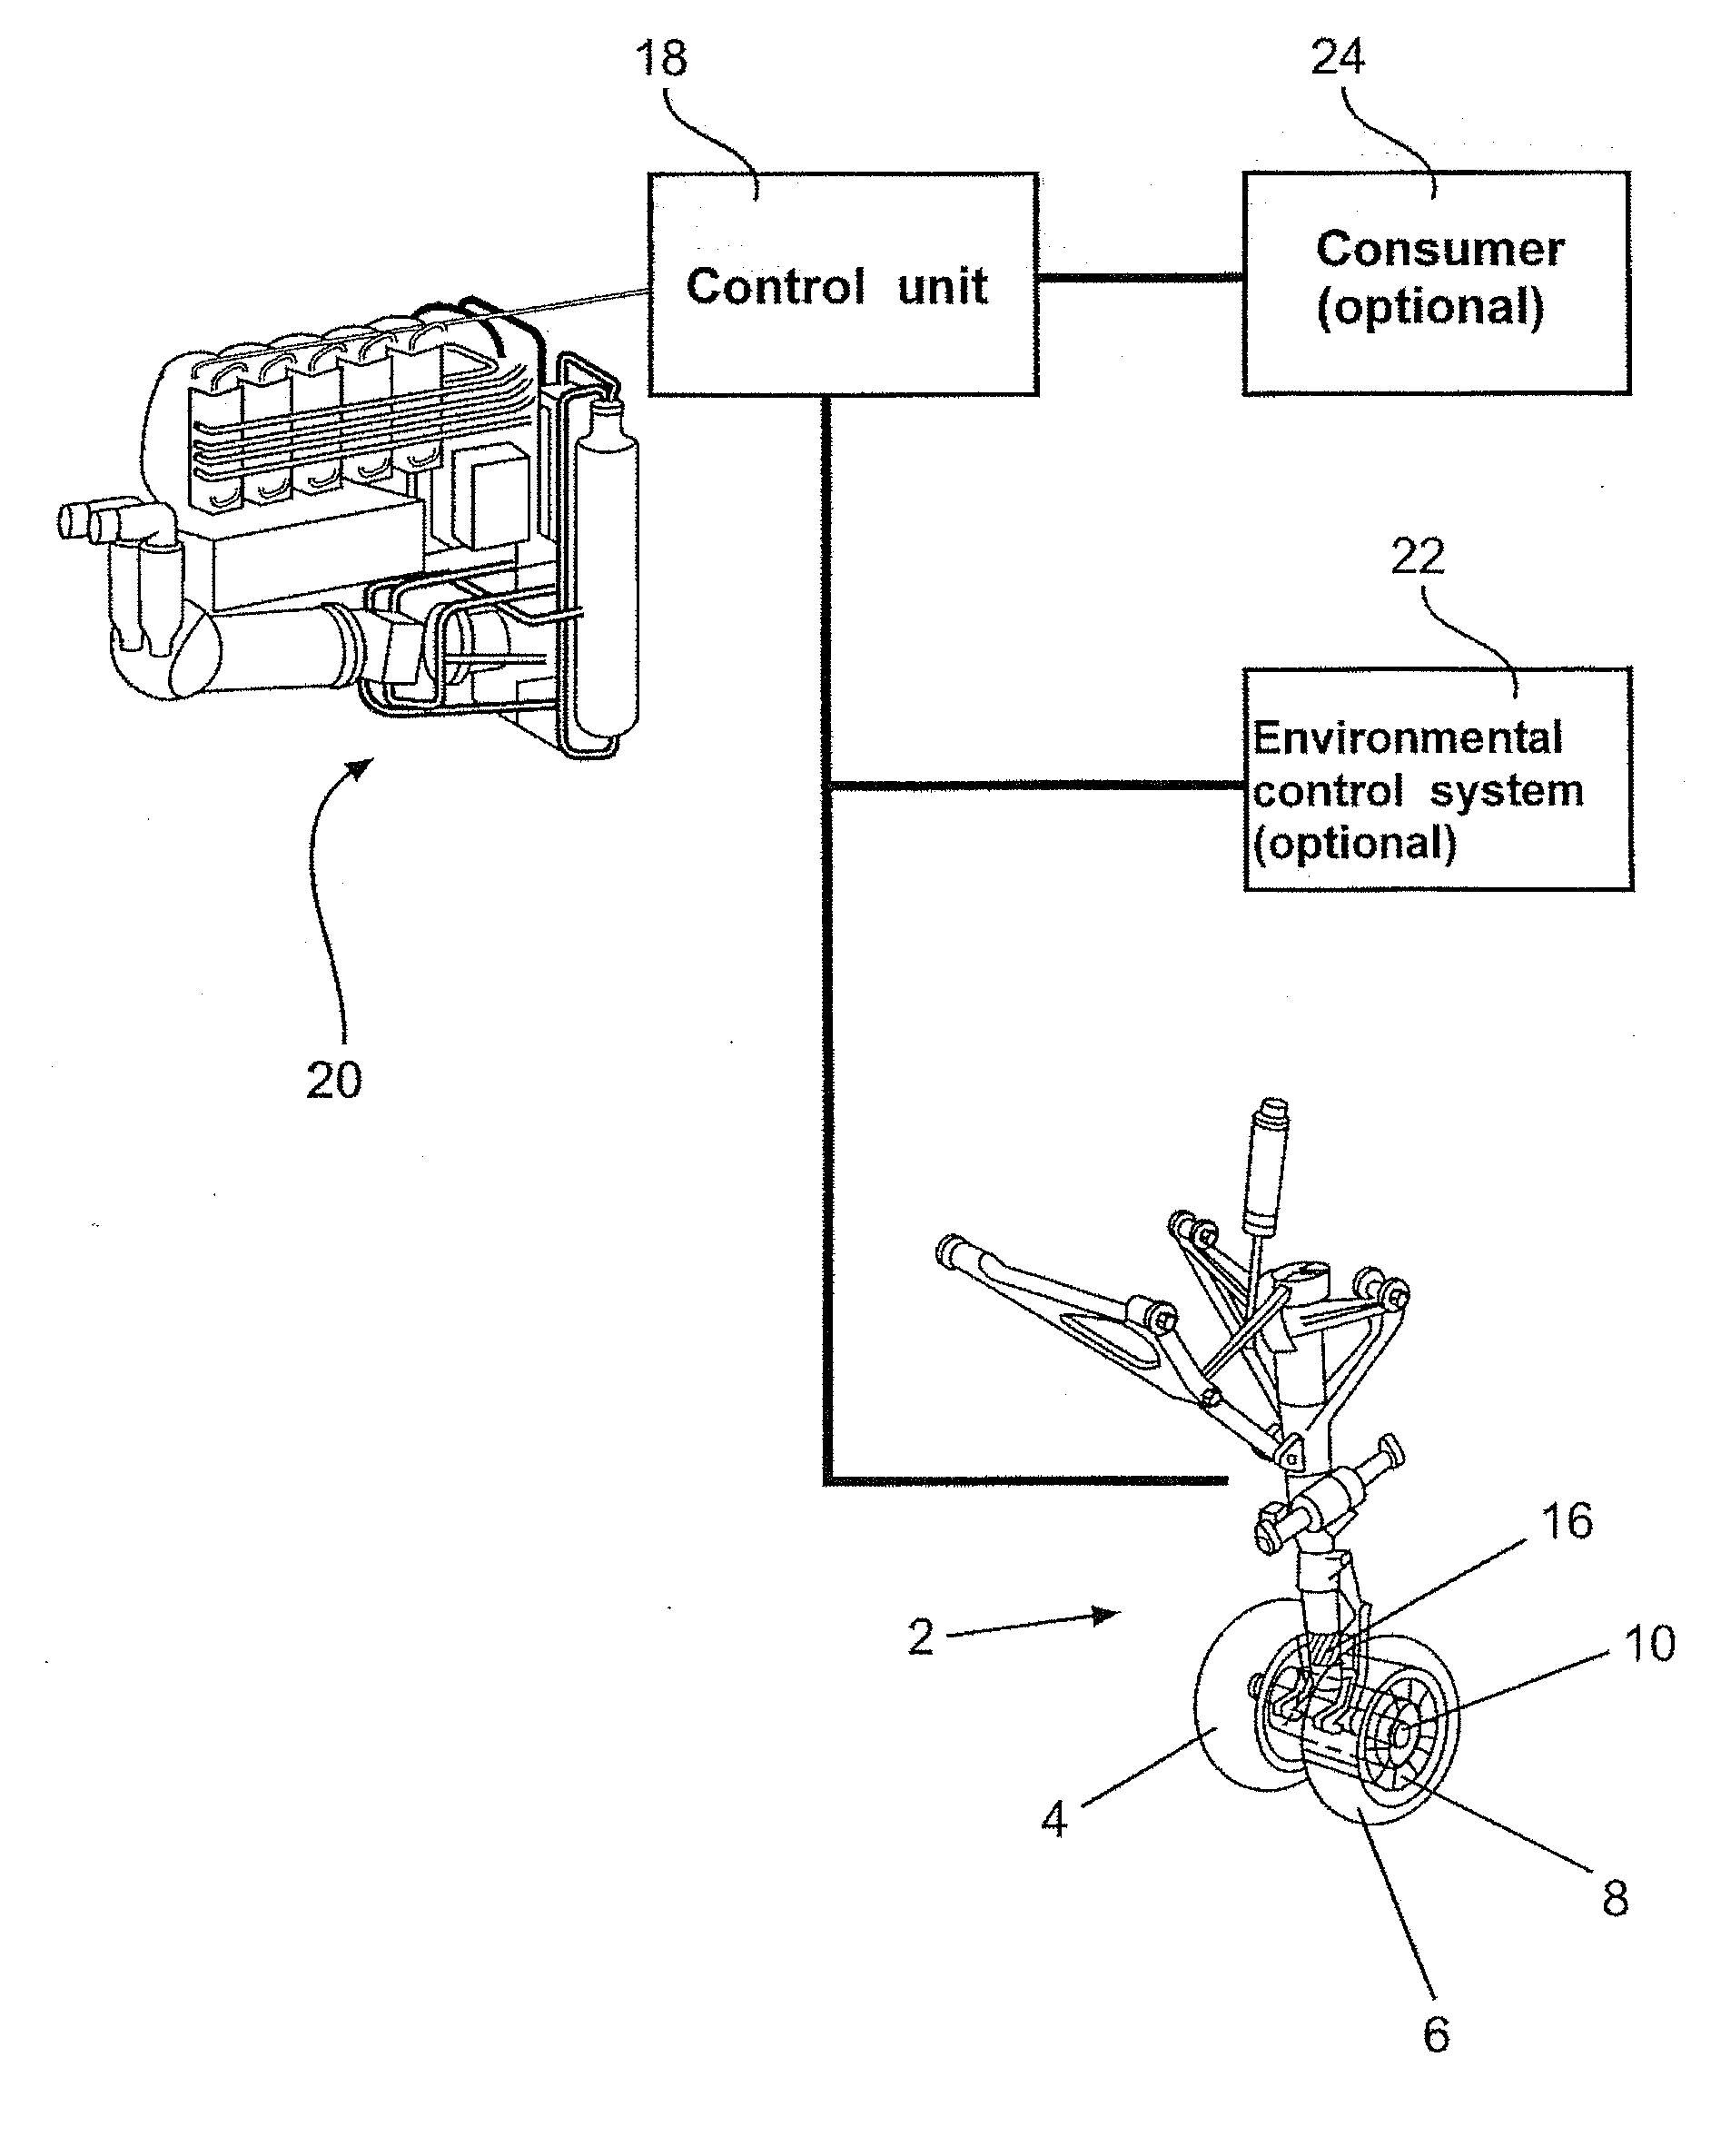 Wheel drive system for an aircraft comprising a fuel cell as an energy source